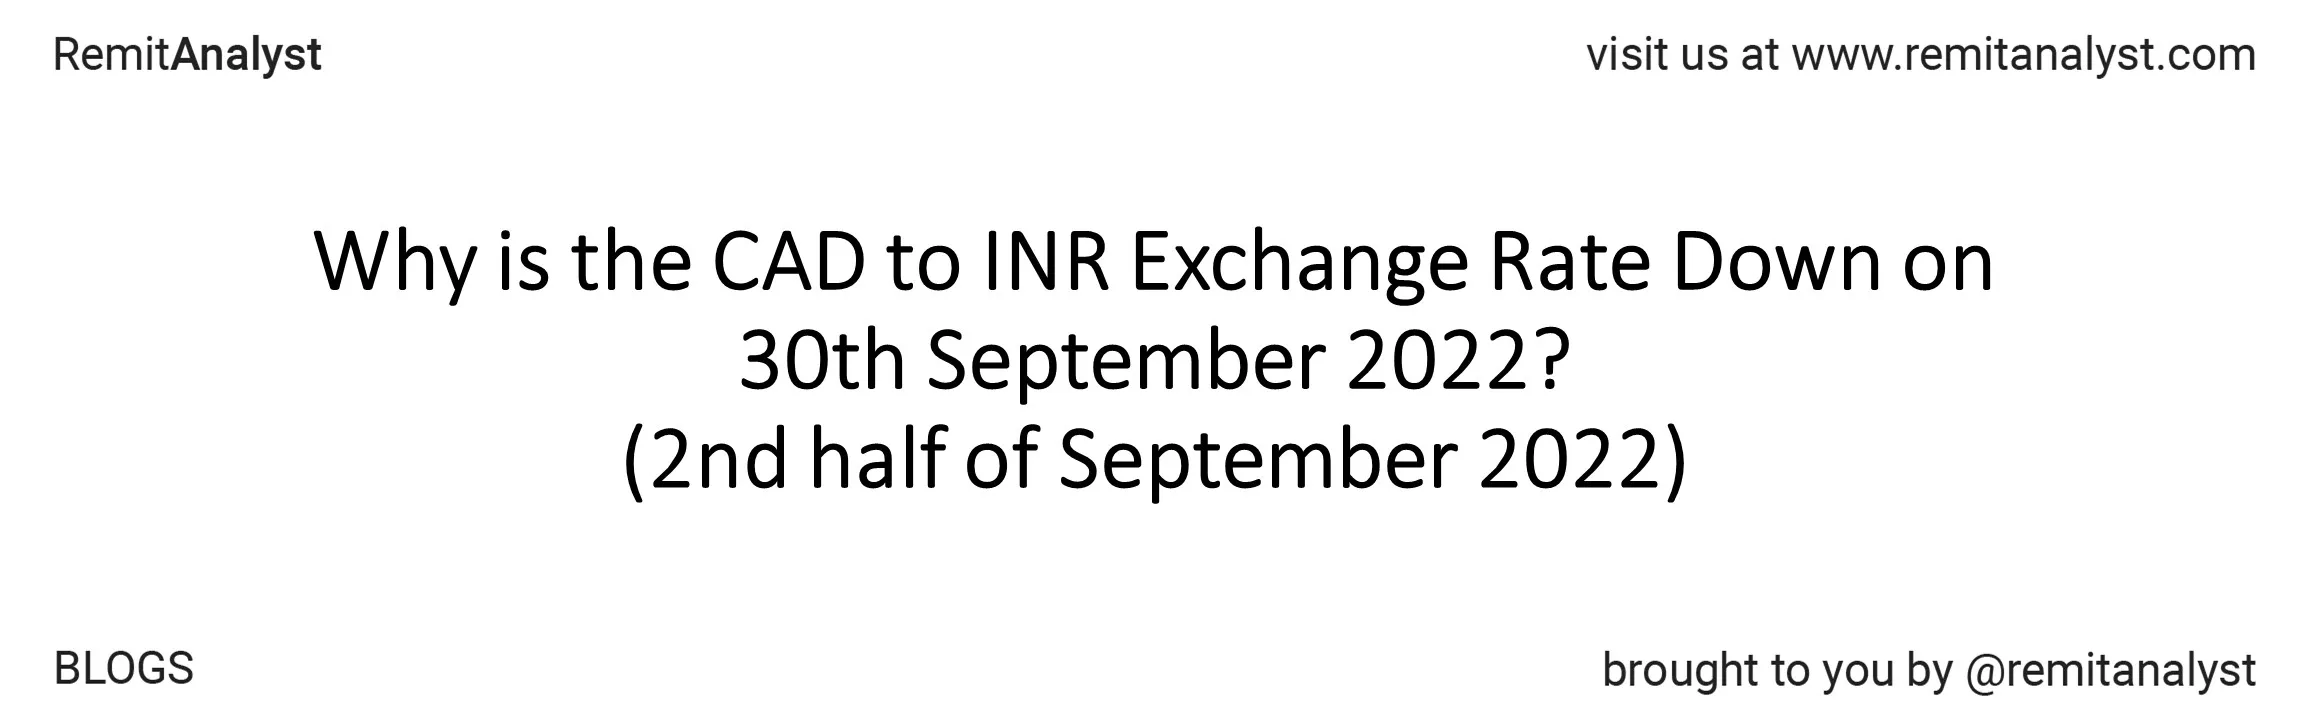 cad-to-inr-exchange-rate-from-9-15-2022-to-9-30-2022-title